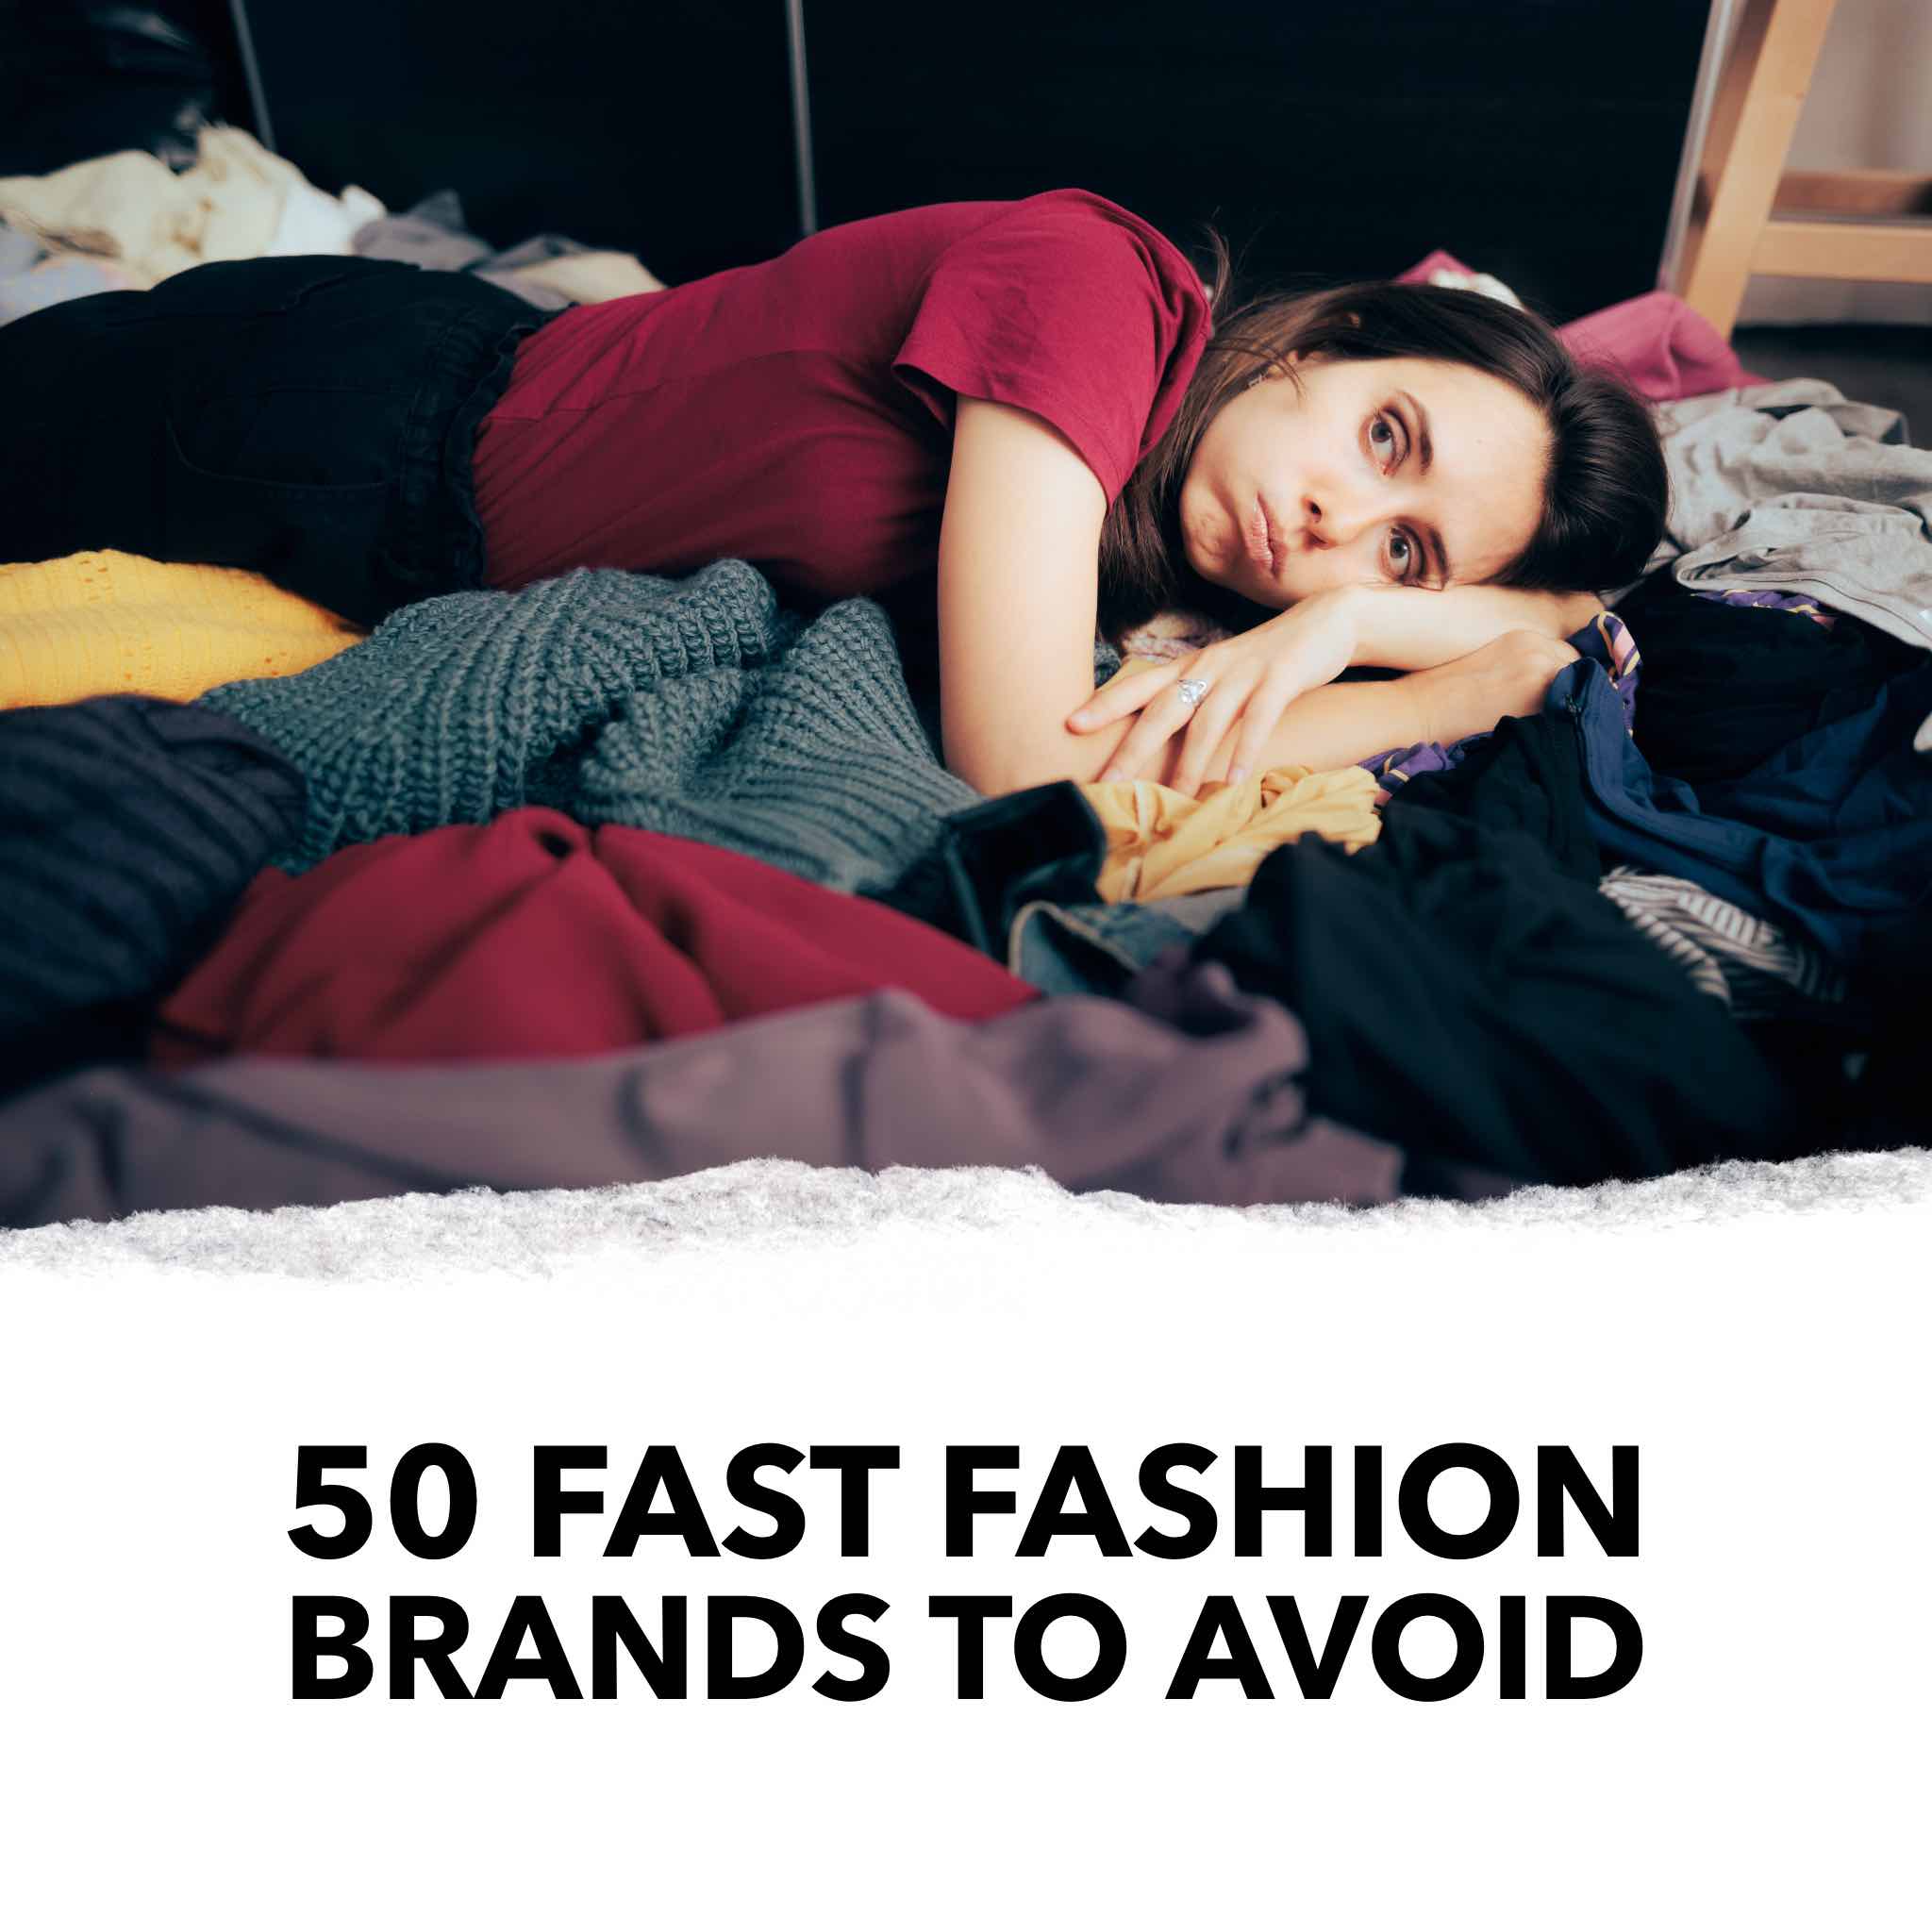 50 fast fashion brands to avoid